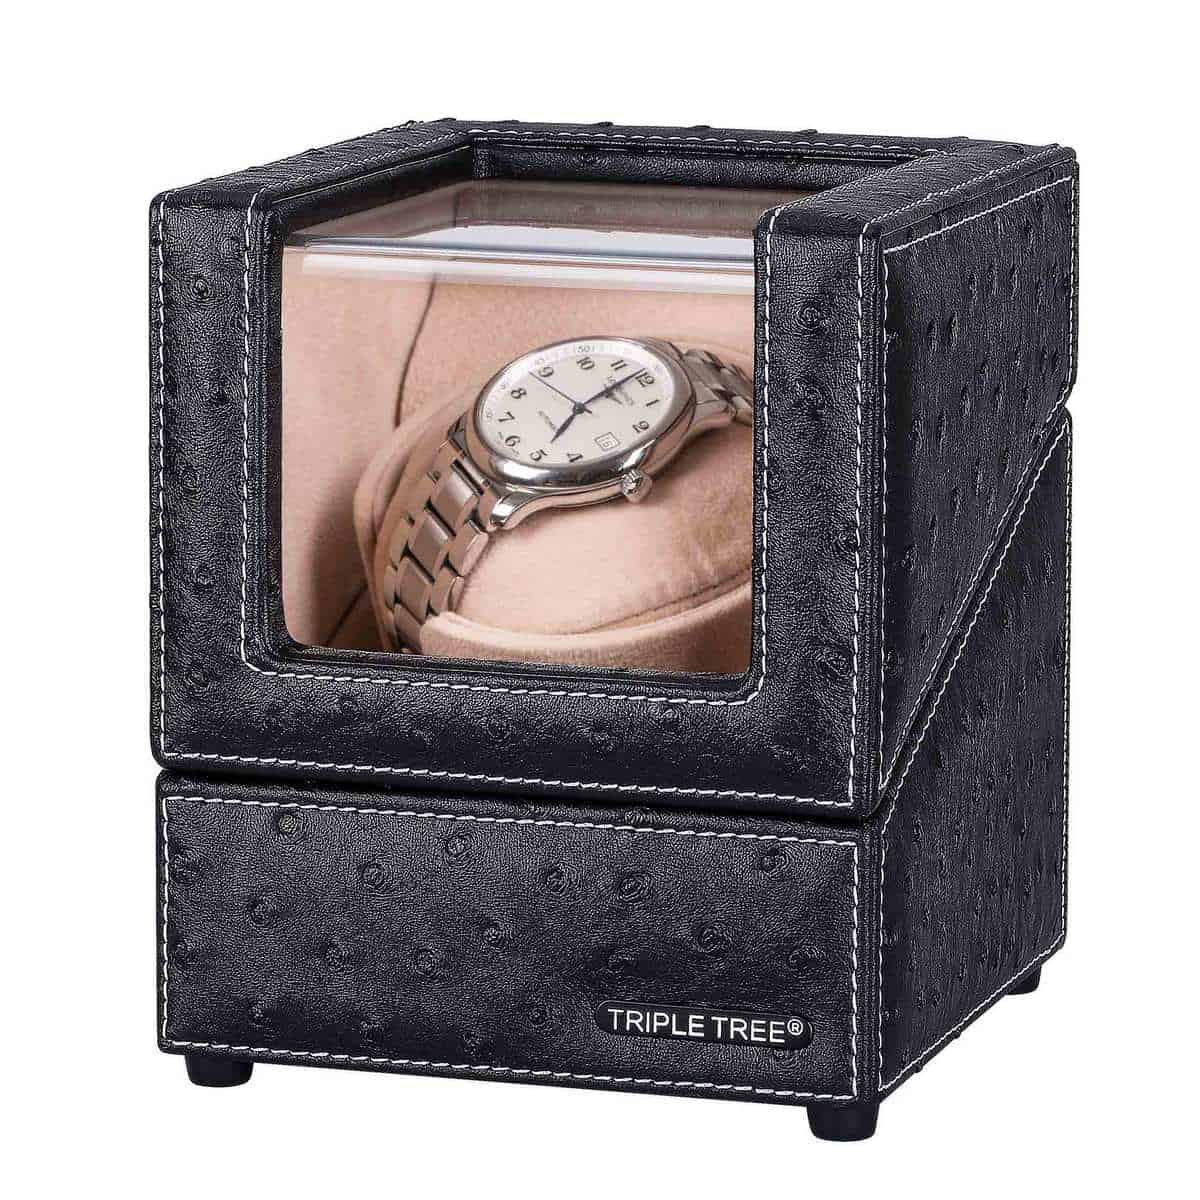 Triple Tree Watch Winder With Flexible Push Pillow